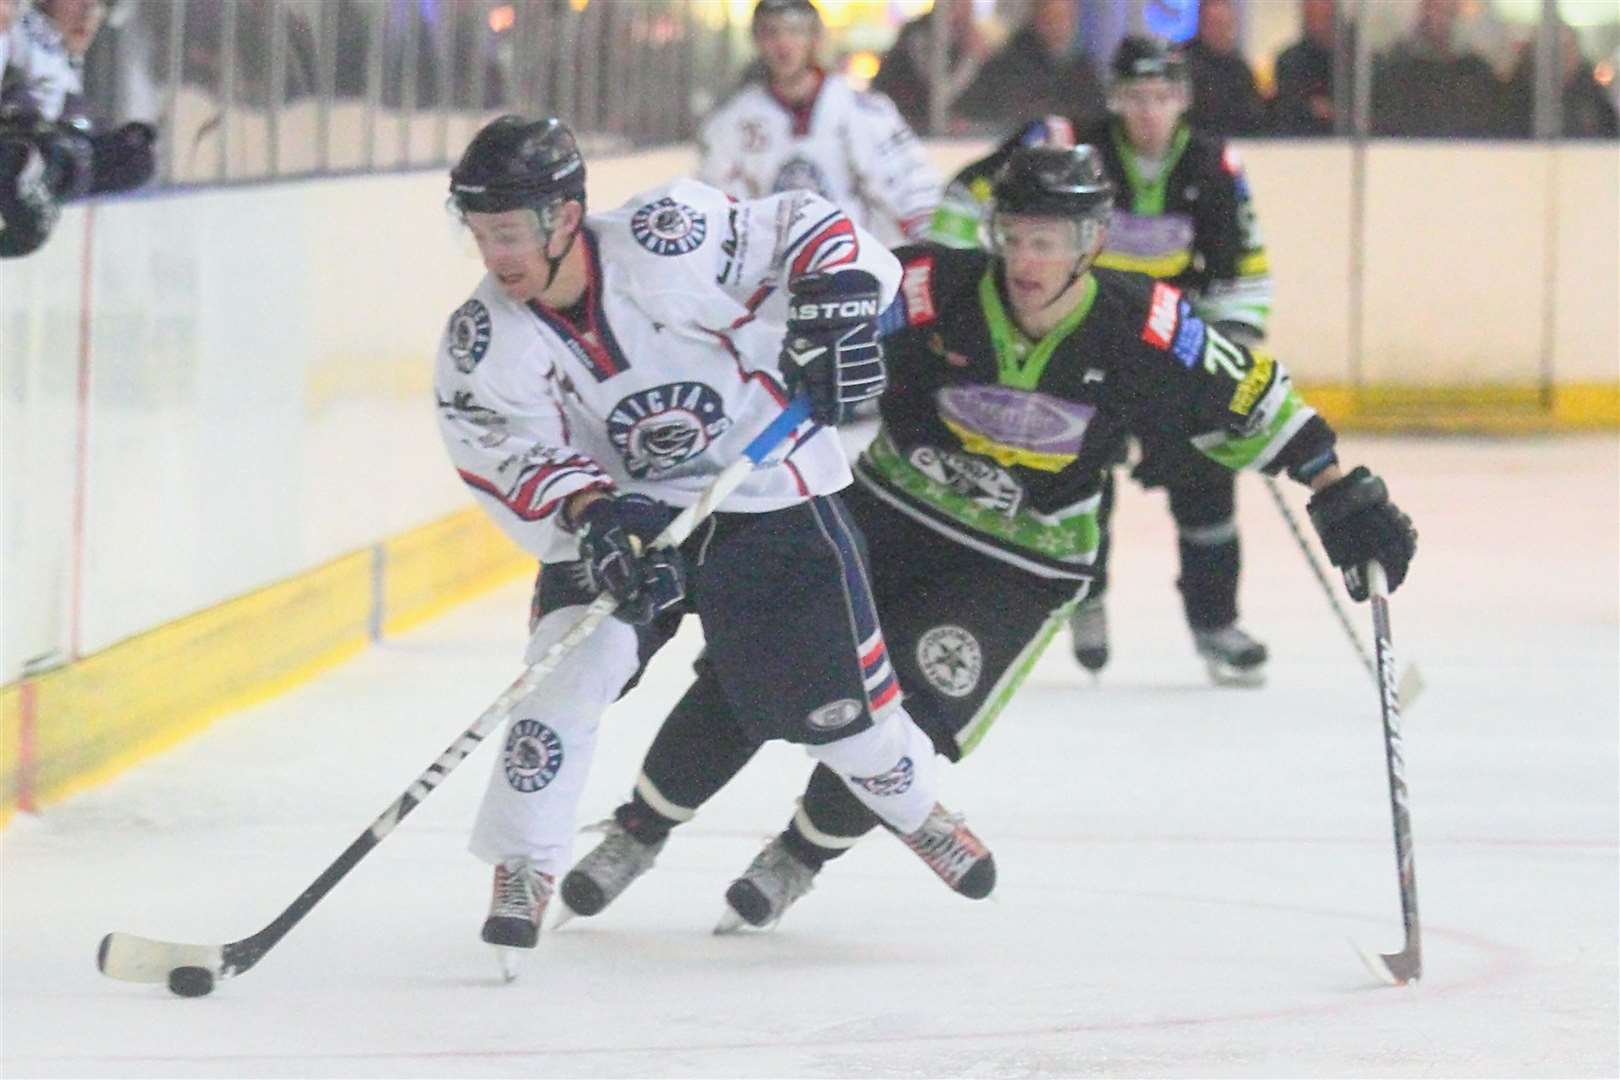 Anthony Lennon in action for the Mos in December 2011 - now assisting older brother Karl Lennon on the coaching team this season Picture: David Trevallion